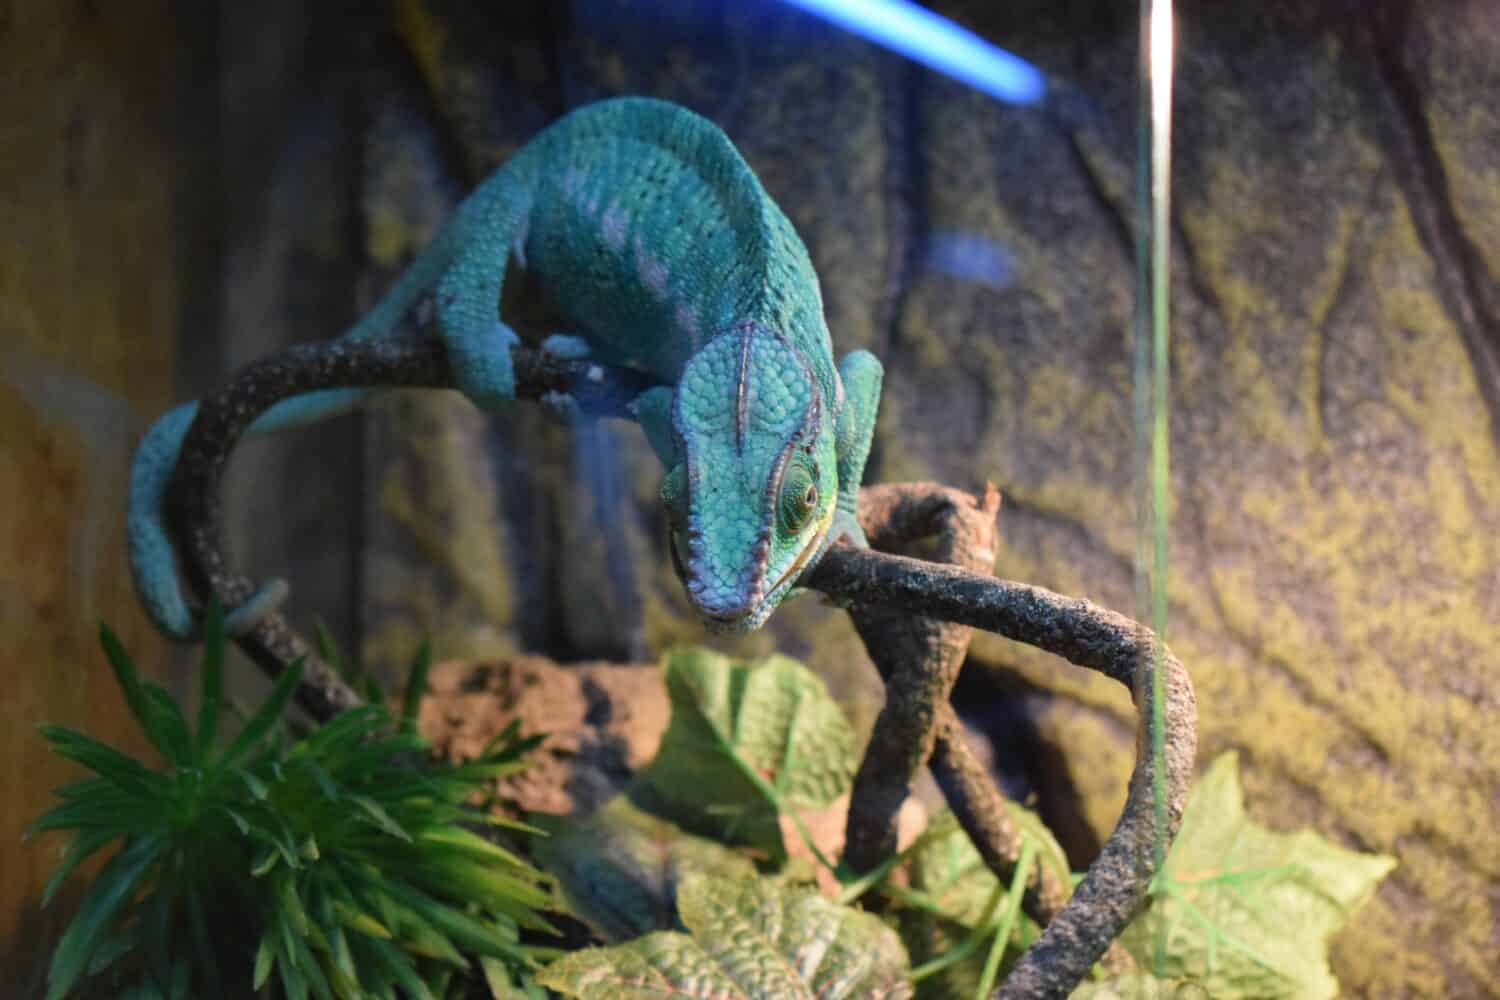 The panther chameleon in an enclosure.